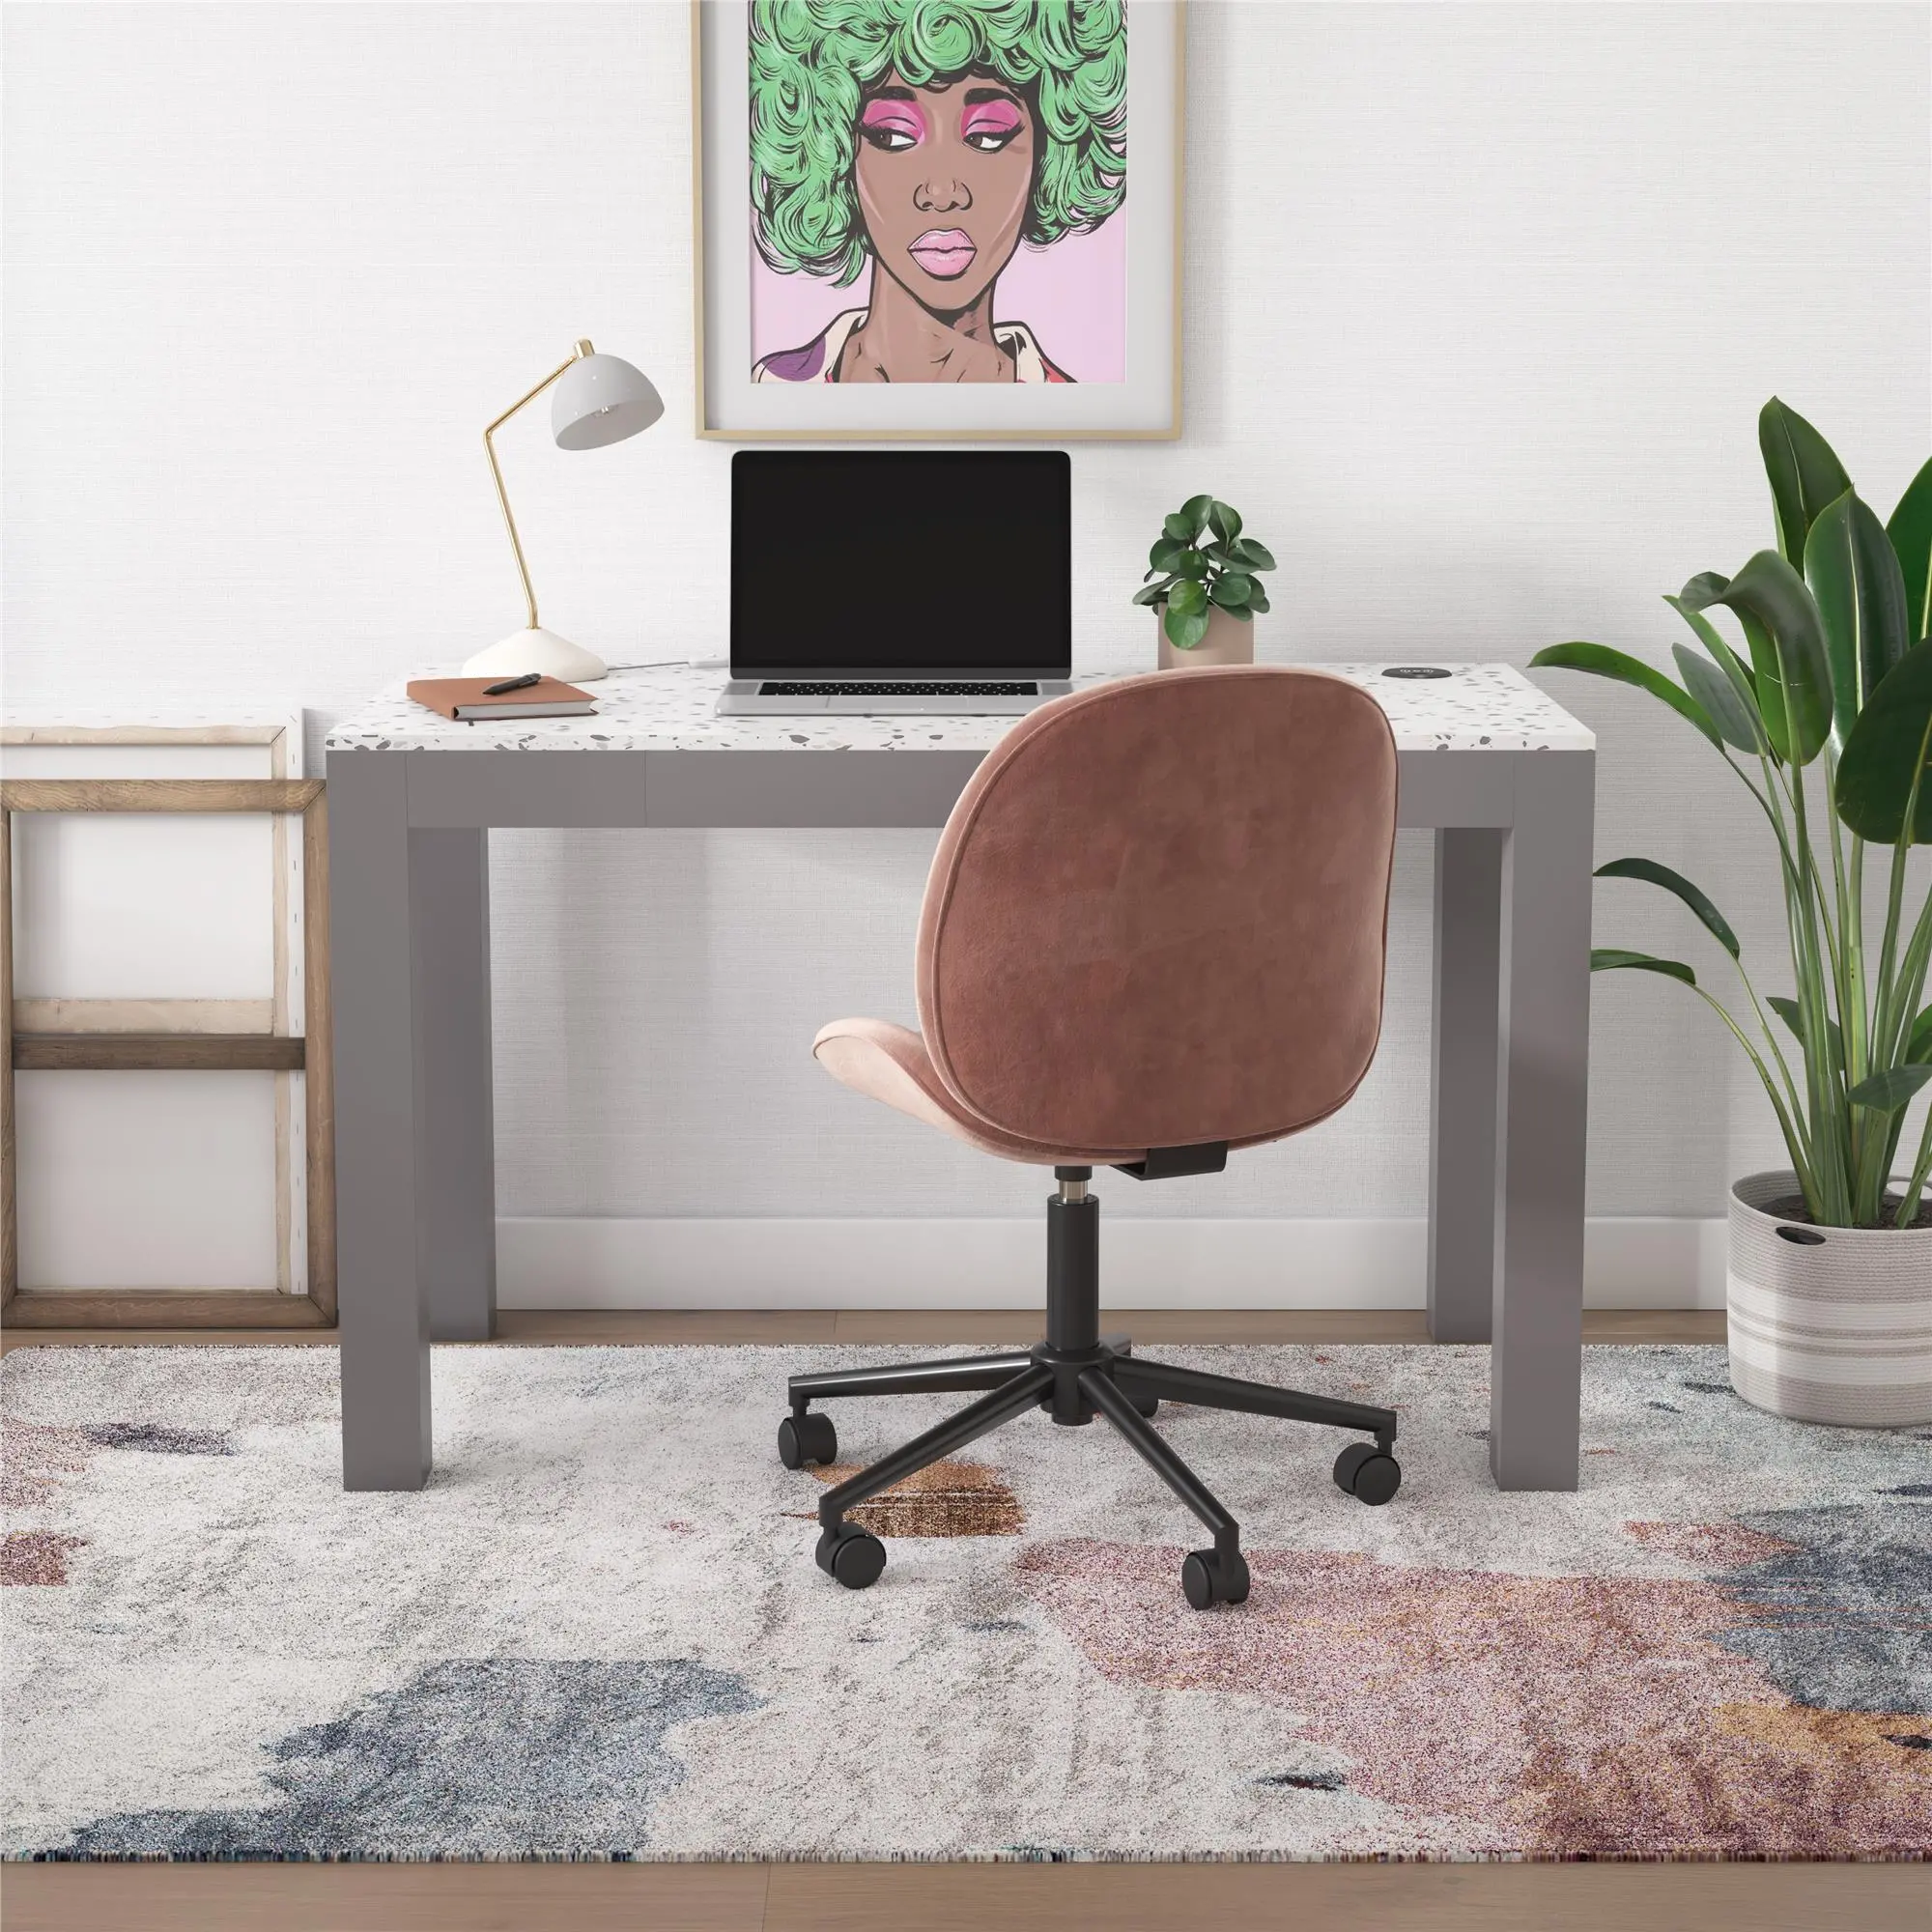 Astor Gray Desk with Wireless Charger